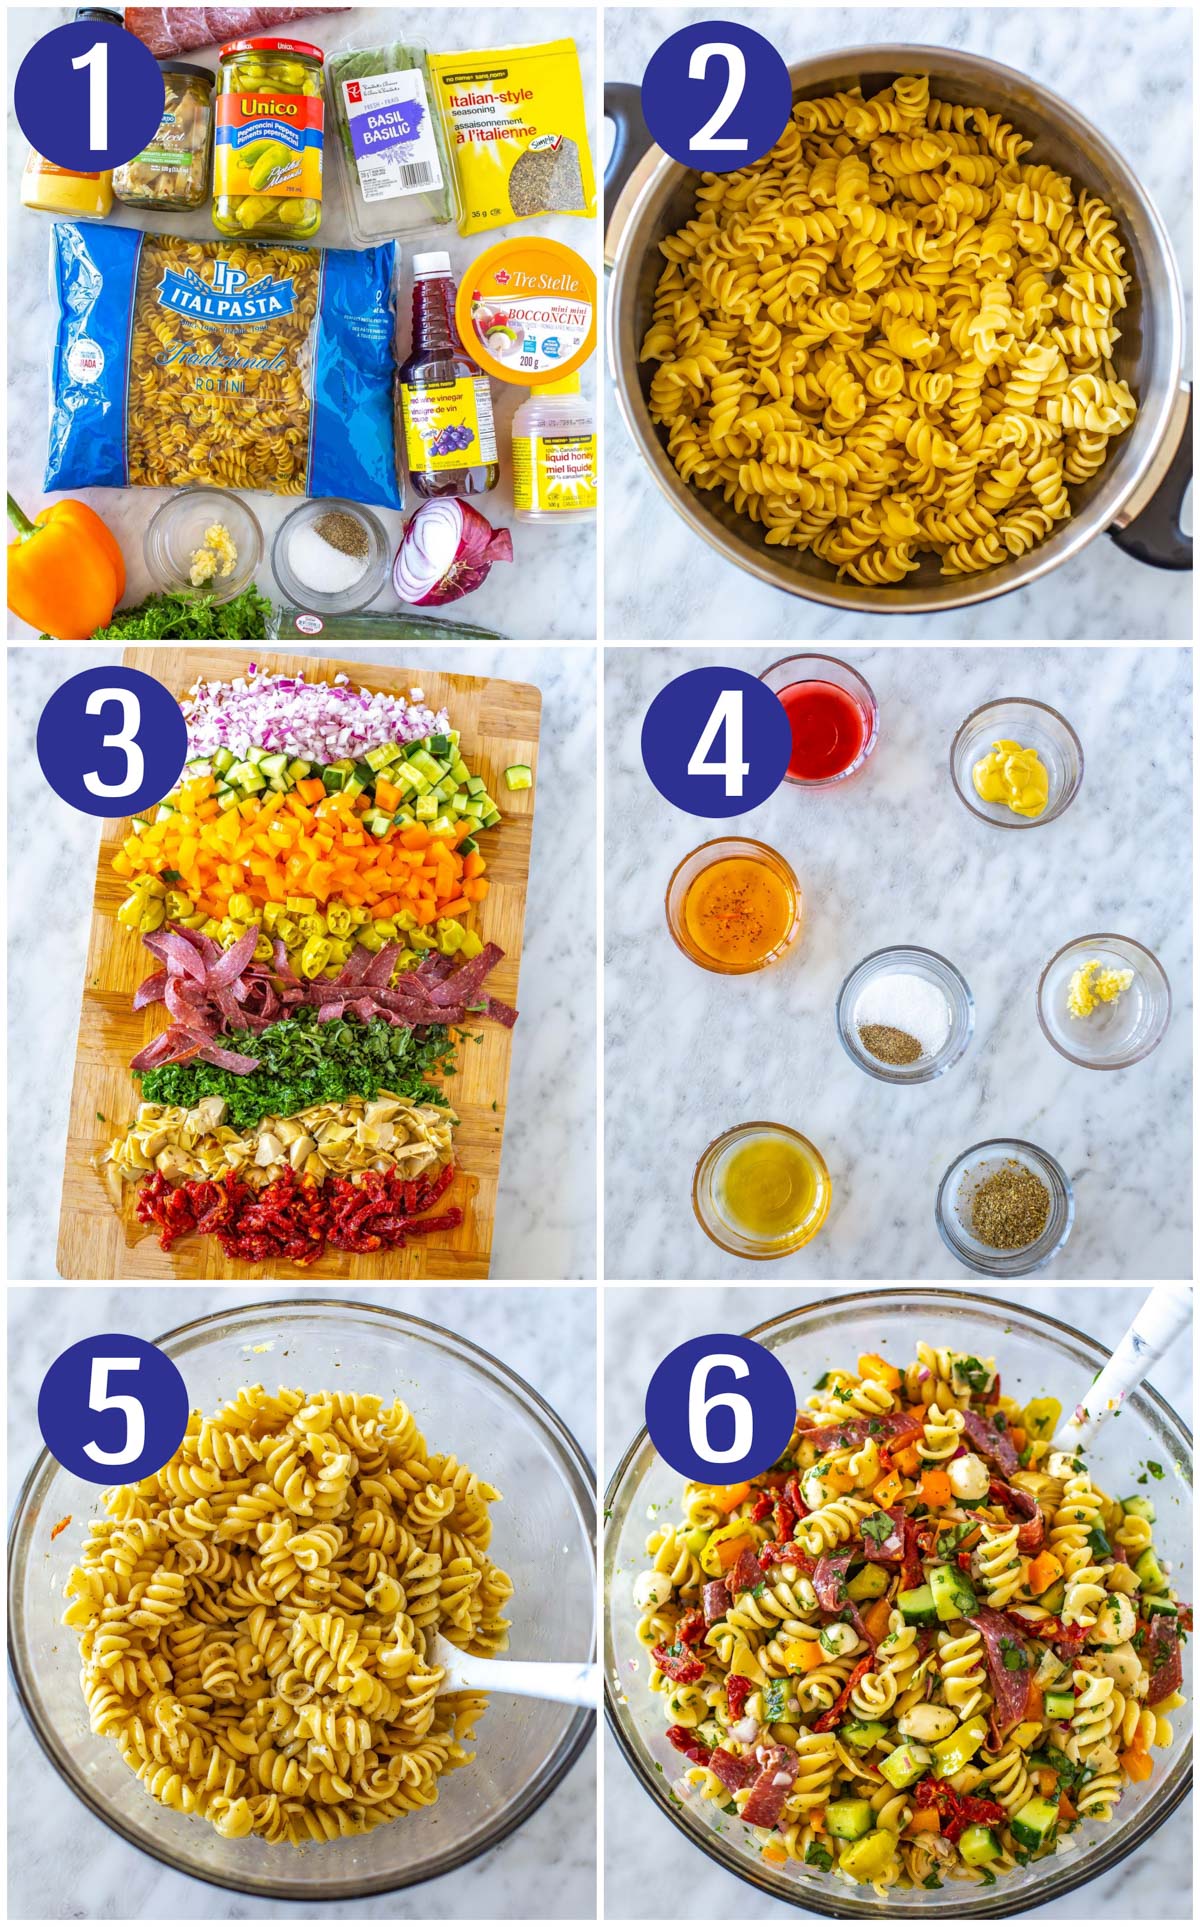 Step-by-step instructions collage for making pasta salad: assemble ingredients, cook pasta, chop ingredients, mix pasta with dressing, add the rest of the ingredients.